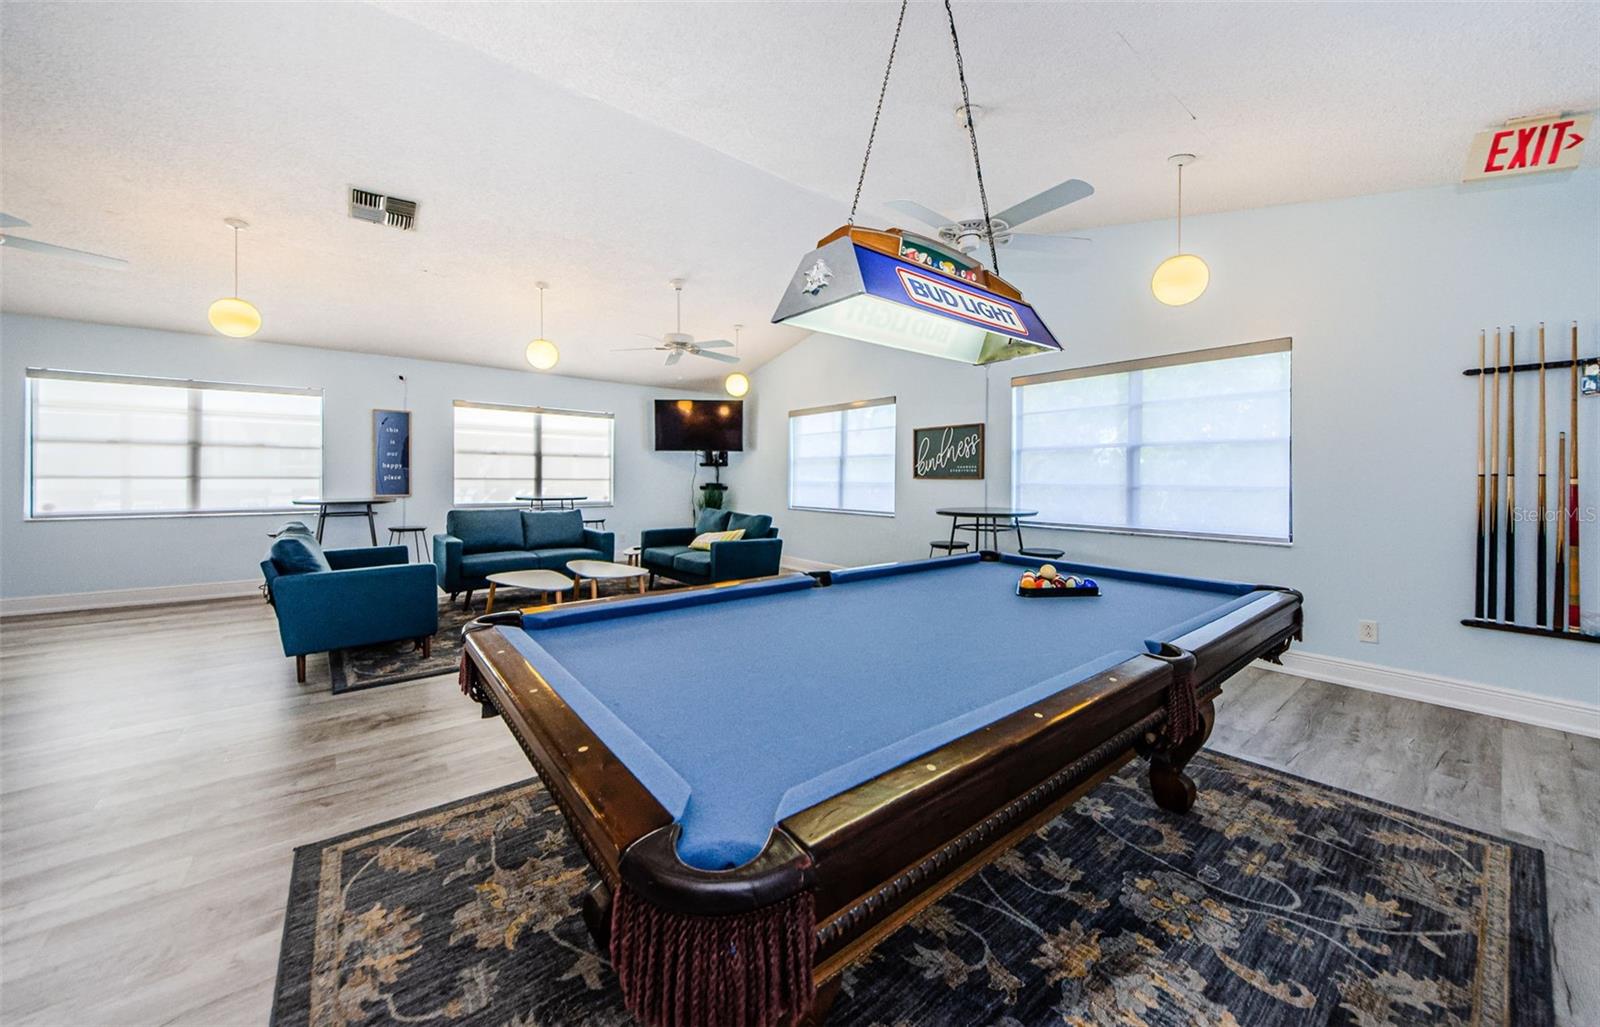 Billiards table in clubhouse